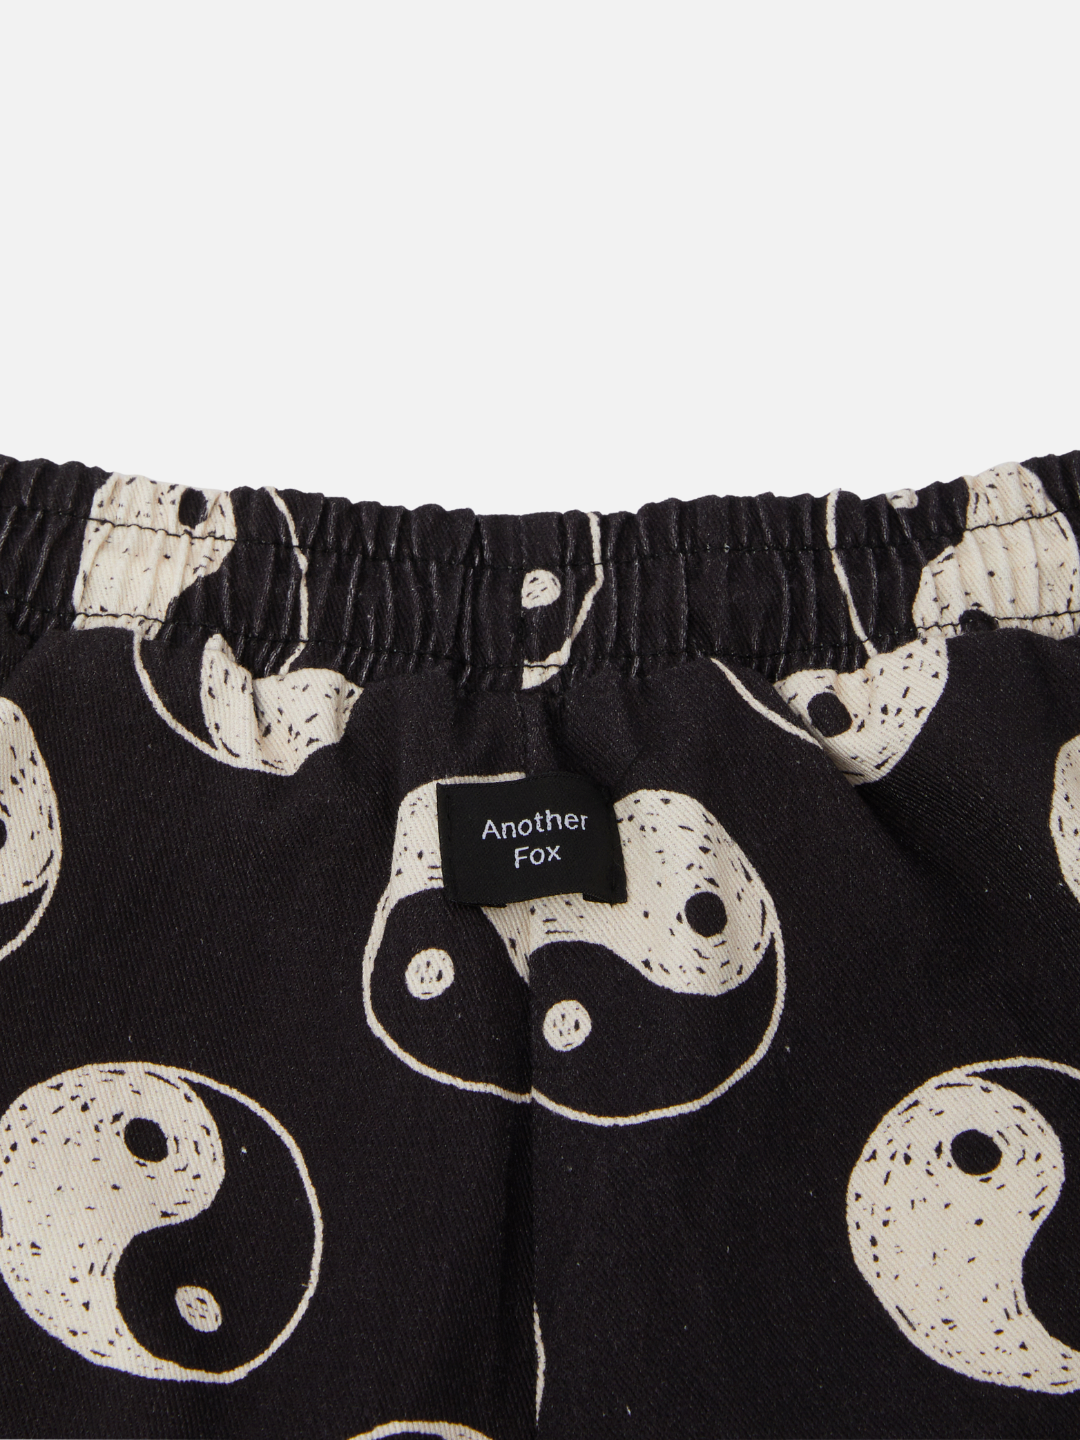 A zooming in back view of the elastic drawstring black shorts with a yin and yang pattern all over.